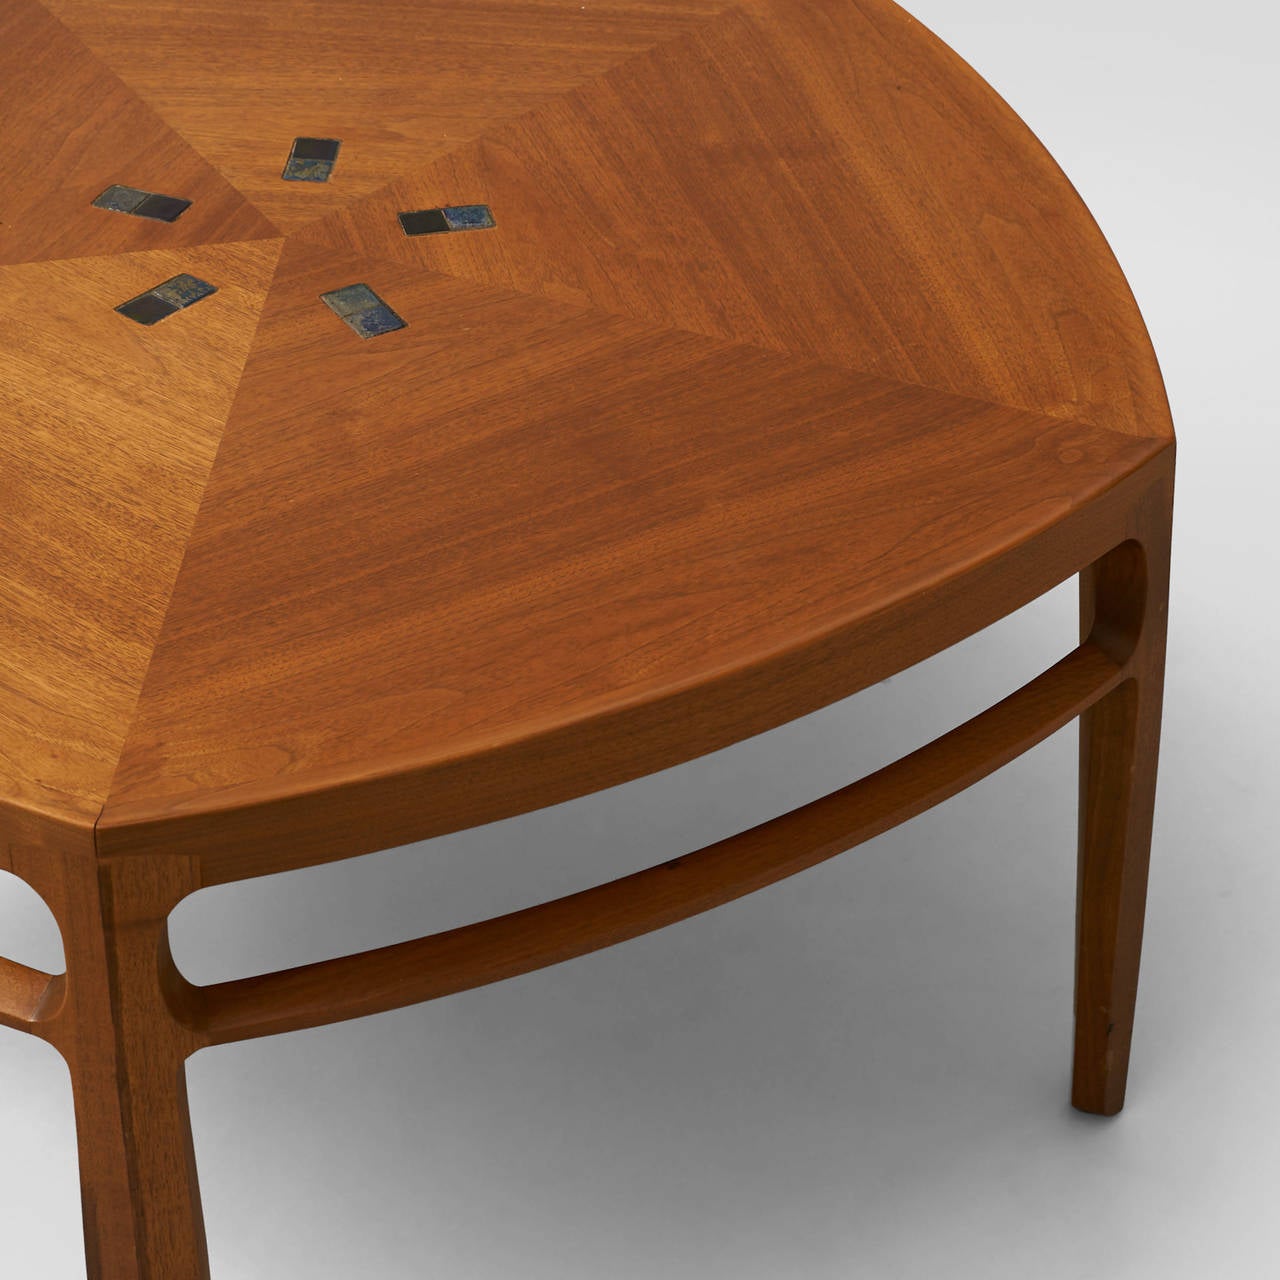 Edward Wormley, pentagonal coffee table
A pentagonal coffee table of mahogany (model 5625T) by Edward Wormley for Dunbar. Features a star burst of Tiffany Studios Favrile glass tiles on the table top. Marked with a rectangular brass Dunbar tag: